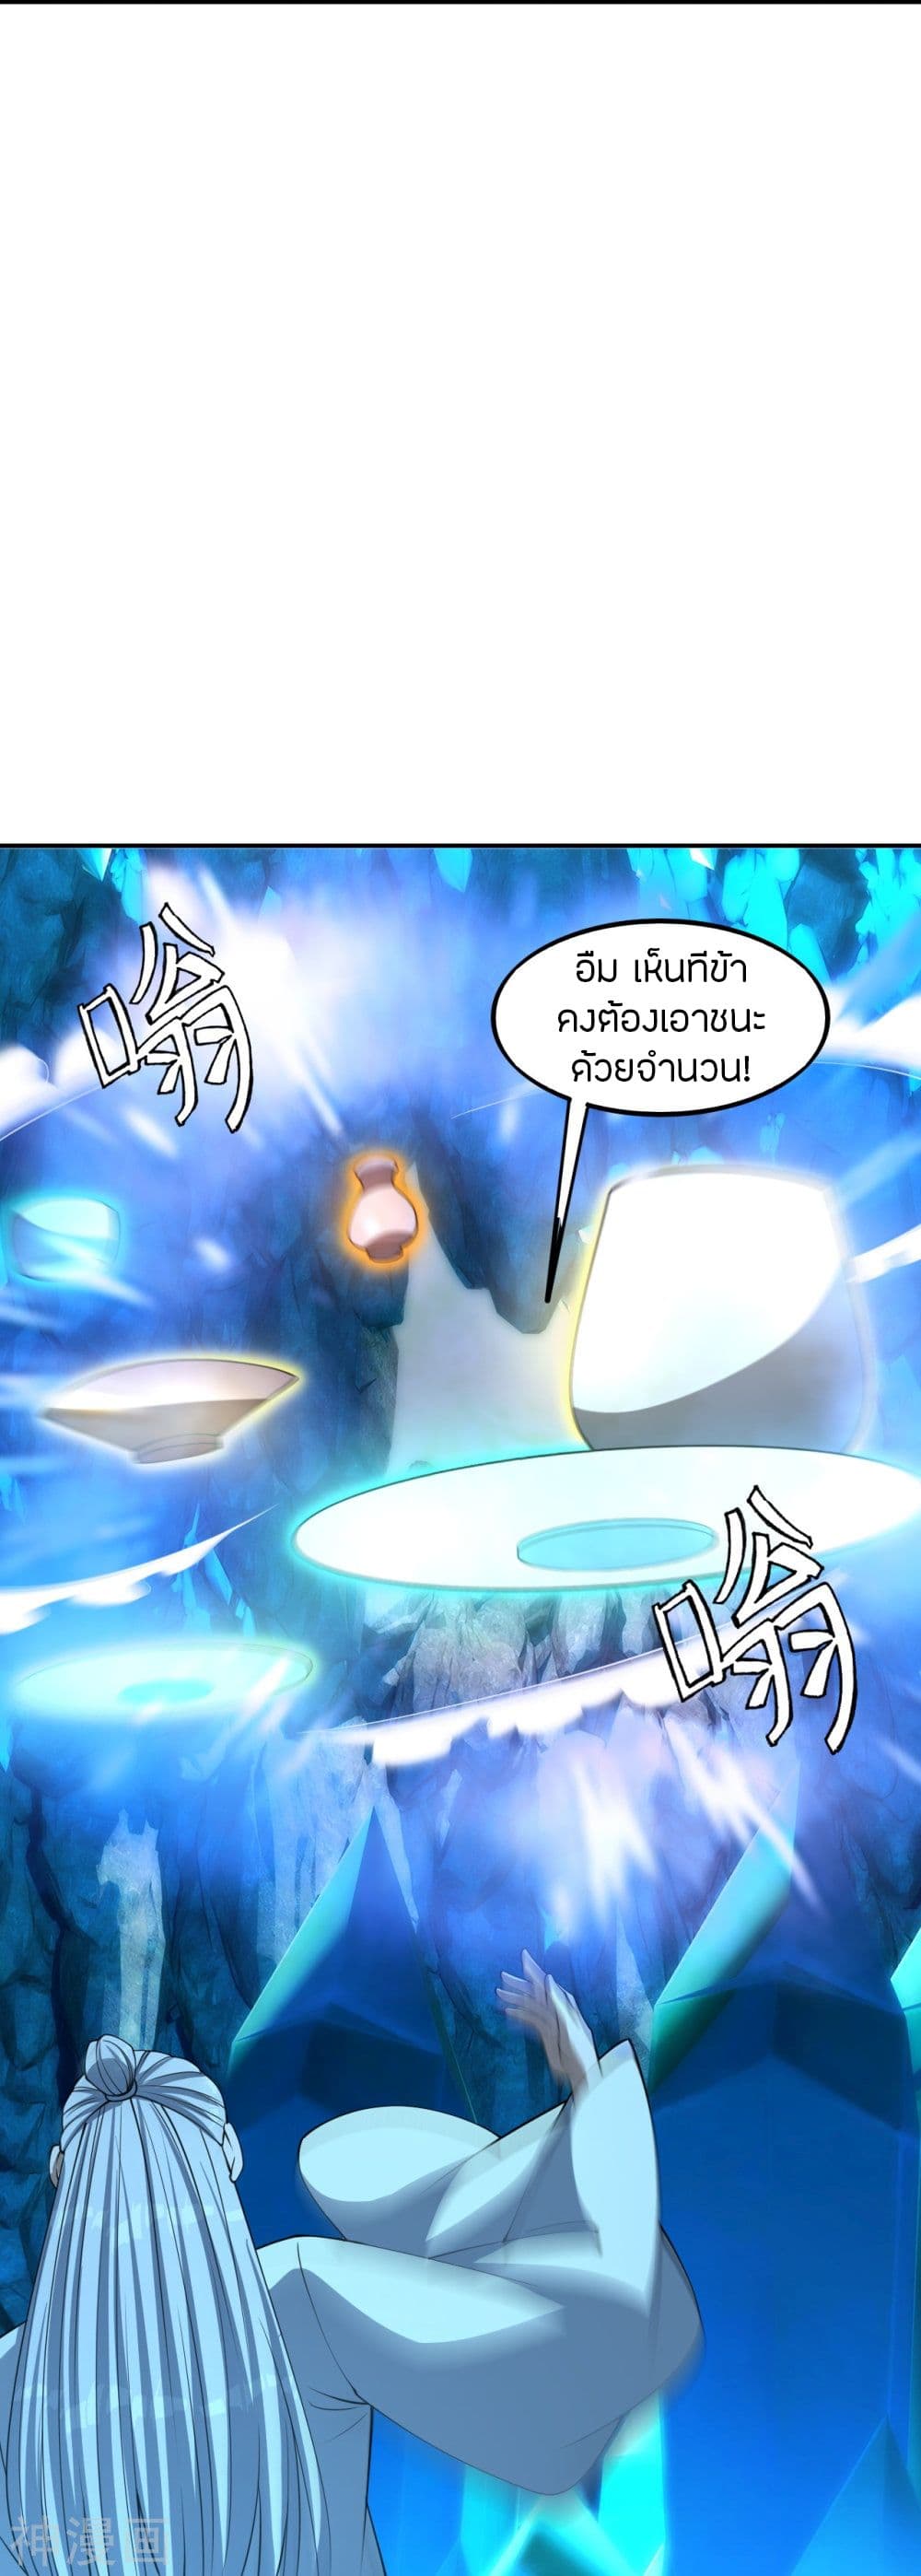 Banished Disciple's Counterattack เธเธฑเธเธฃเธเธฃเธฃเธ”เธดเน€เธเธตเธขเธเธขเธธเธ—เธ 239 (58)